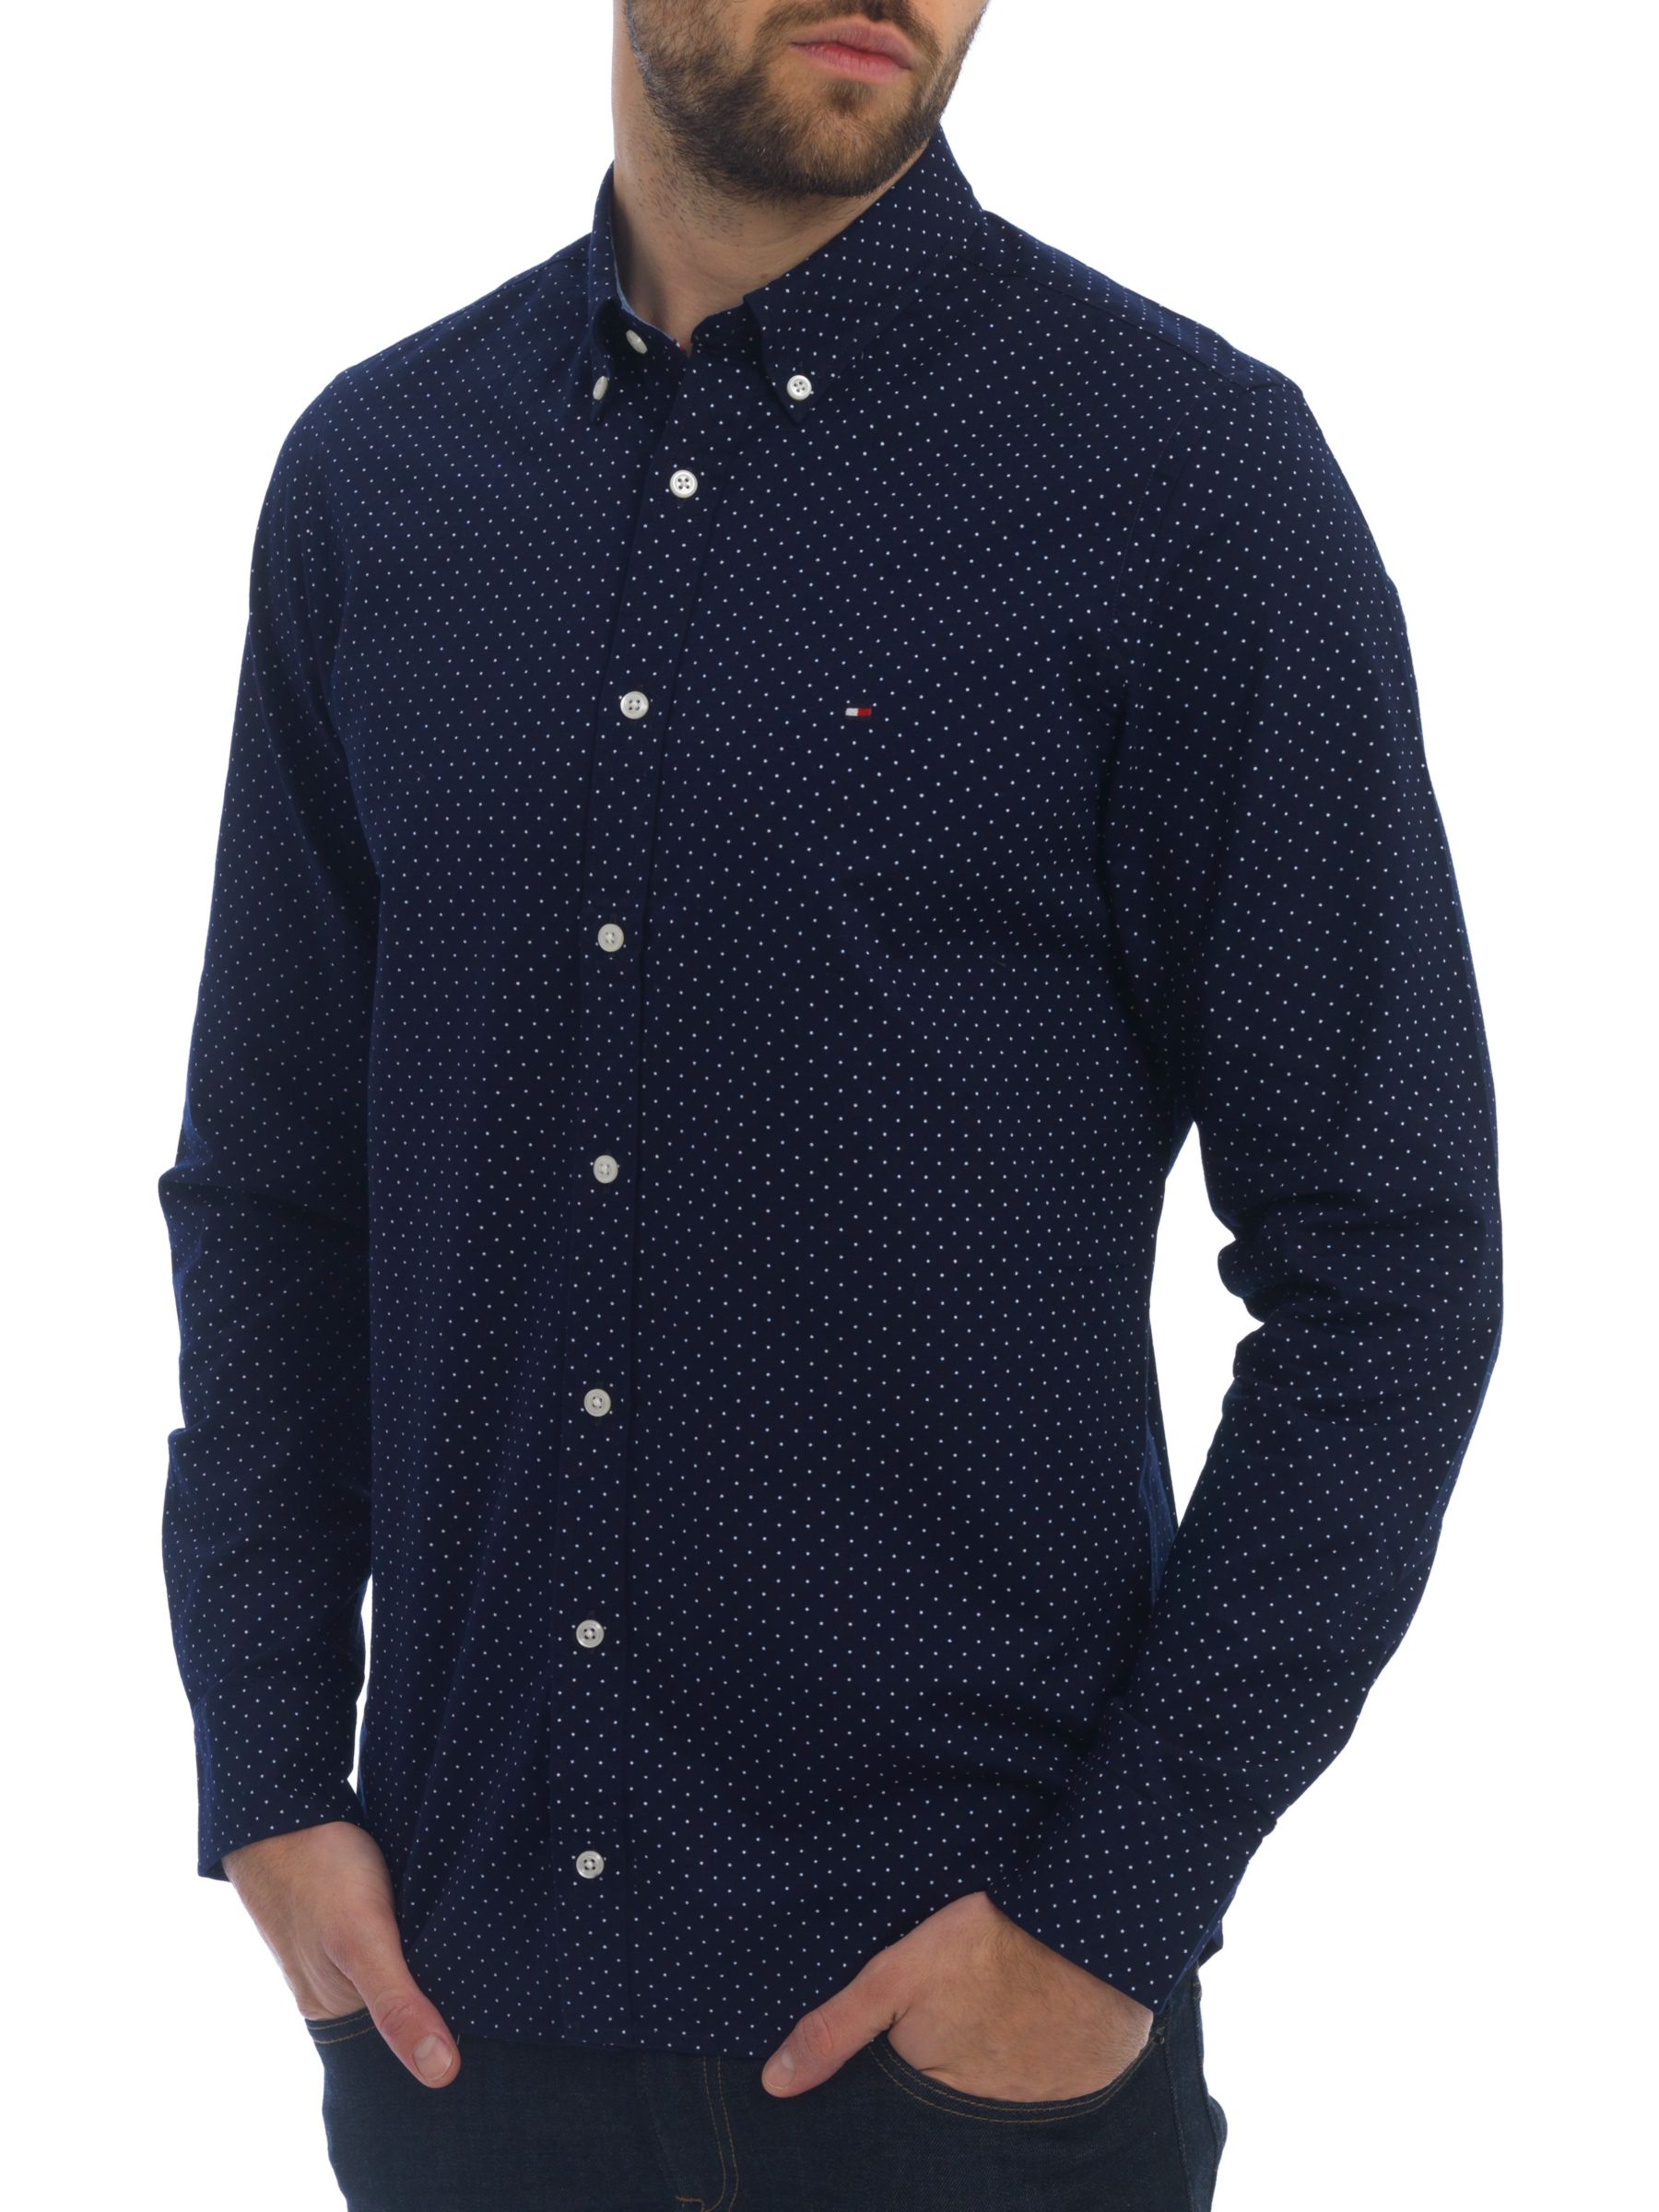 dotted shirts for mens